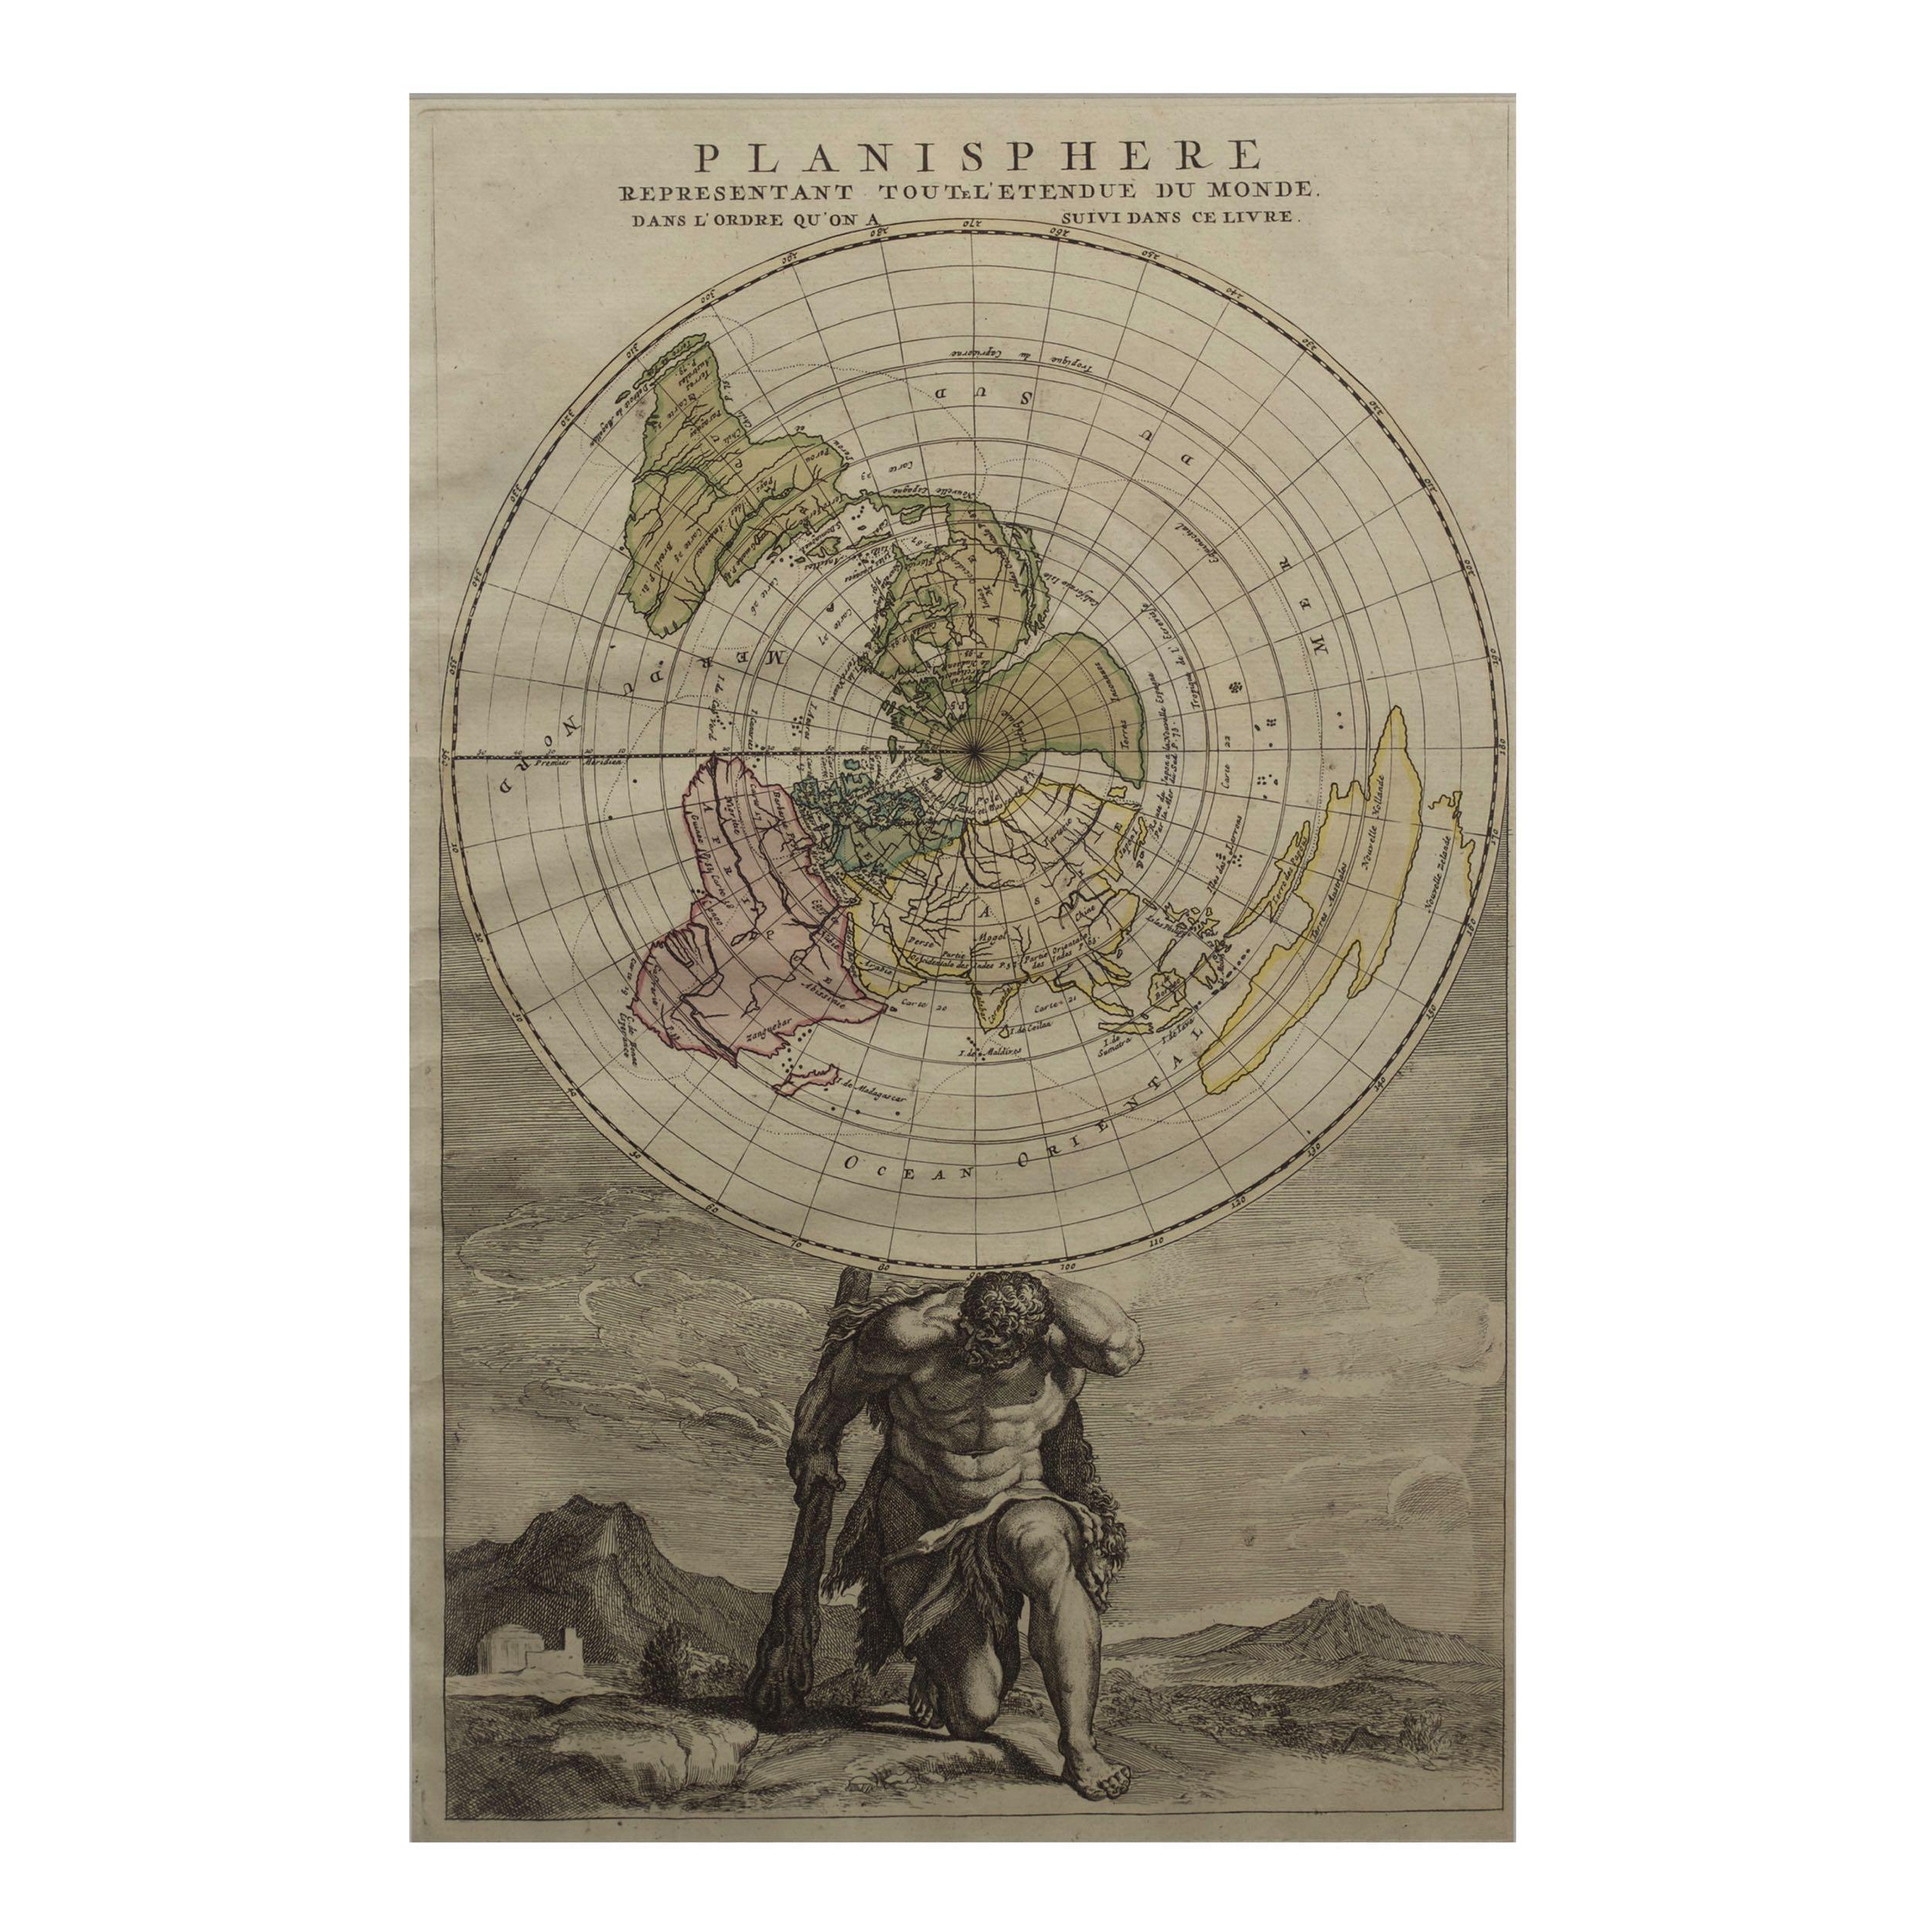 A rich and interesting world map derived from Jacques Cassini's North Polar projection first published in 1696. It was then published as a title page for the Atlas De La Navigation Et Du Commerce by Louis Renard in both 1715 and 1739. Due to the